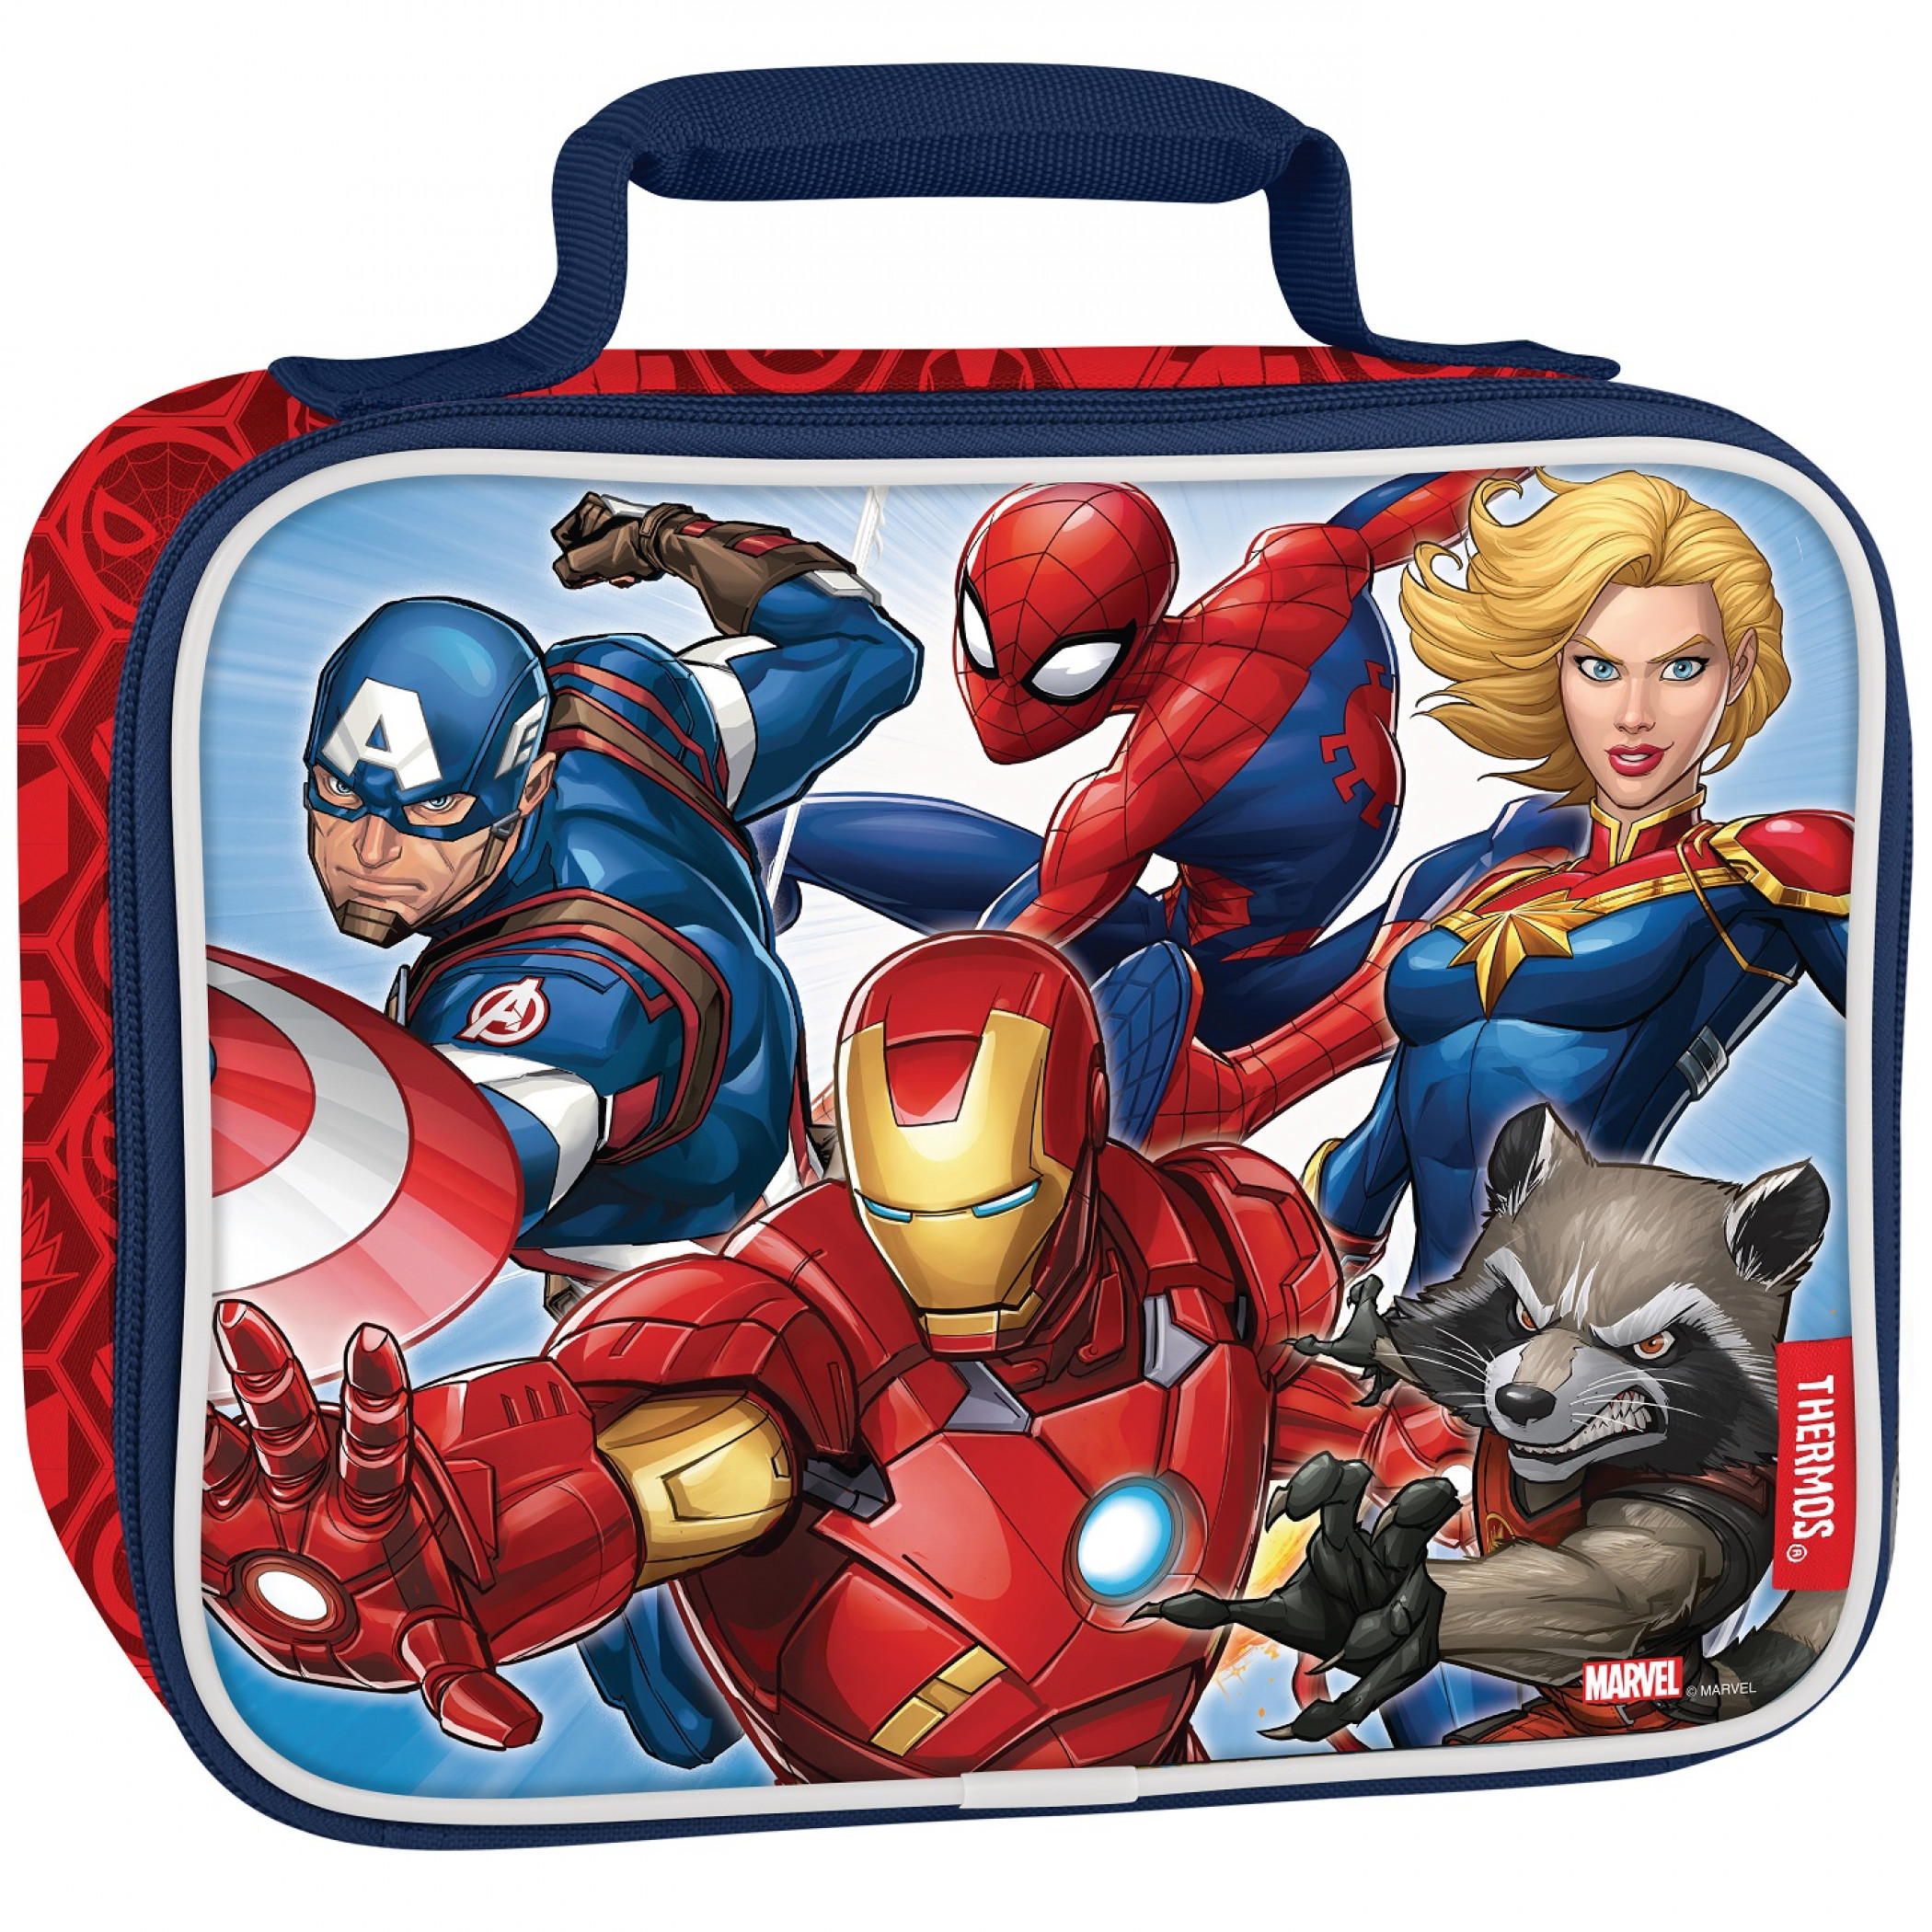 Marvel Avengers Thermos Insulated Lunch Box